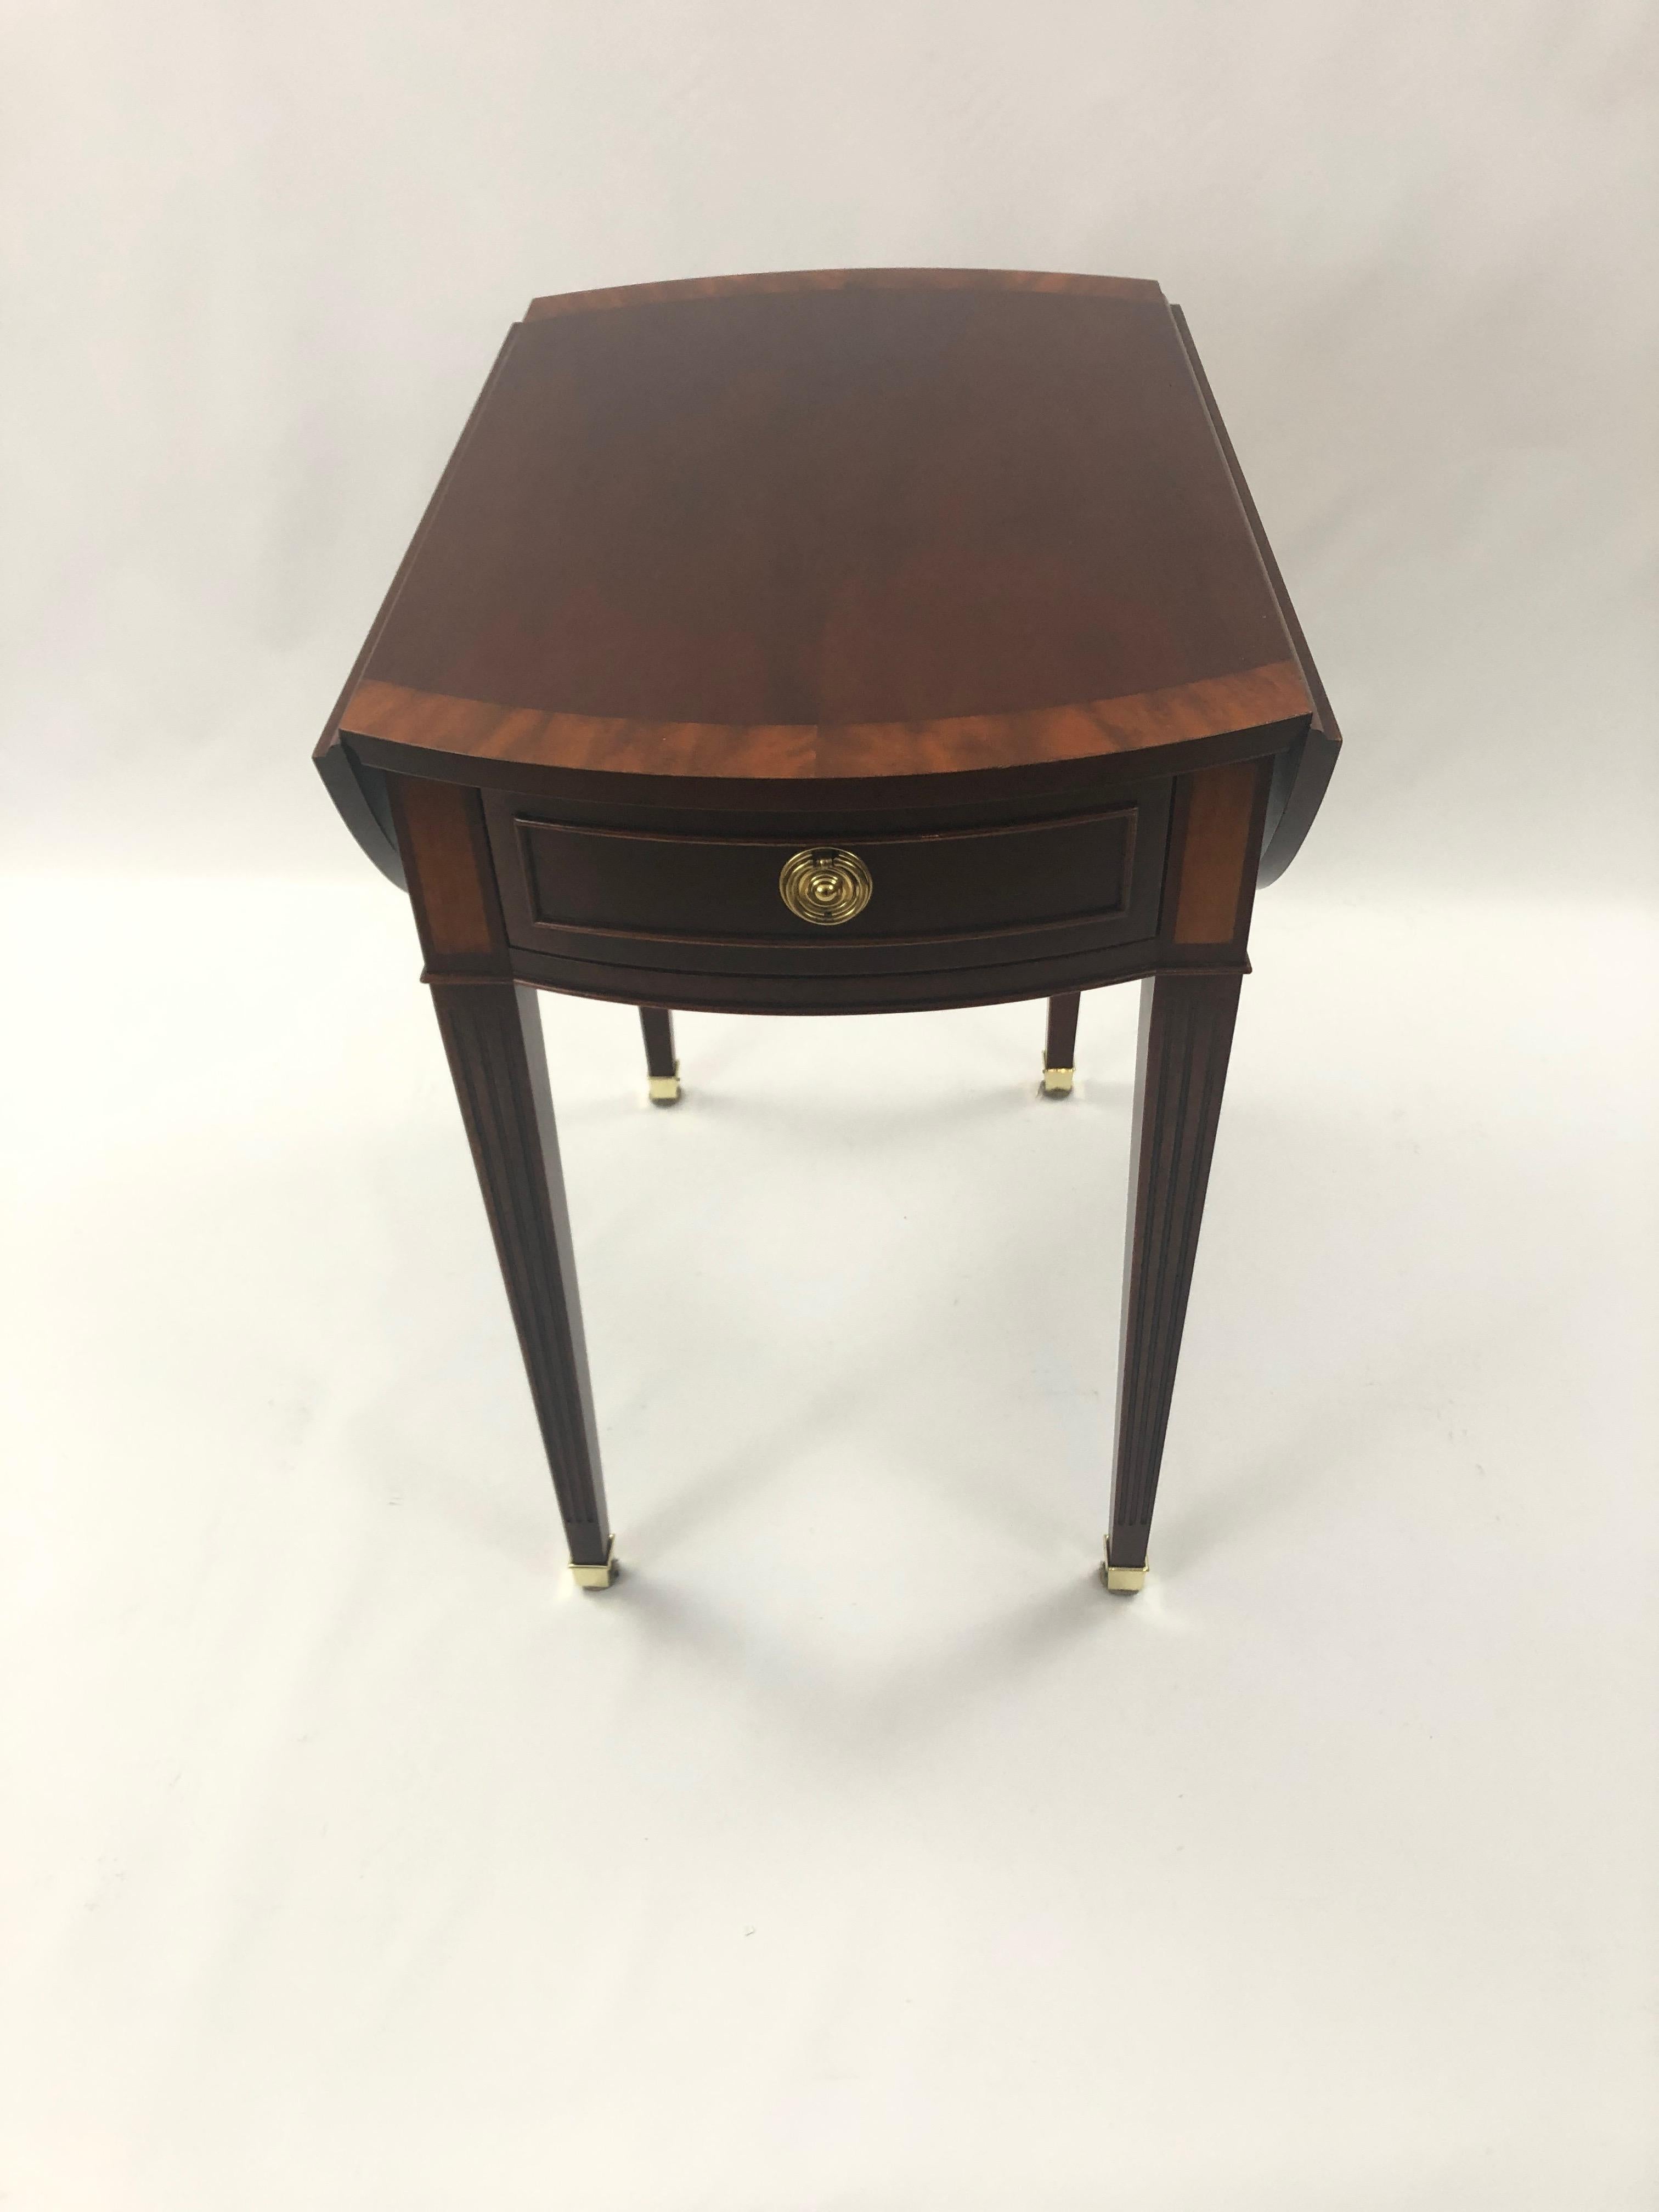 A Classic mahogany pembroke style drop leaf side table by Baker, having lovely banded inlay, single drawer, elegant tapered legs, and when open becomes an oval.
Open 31 